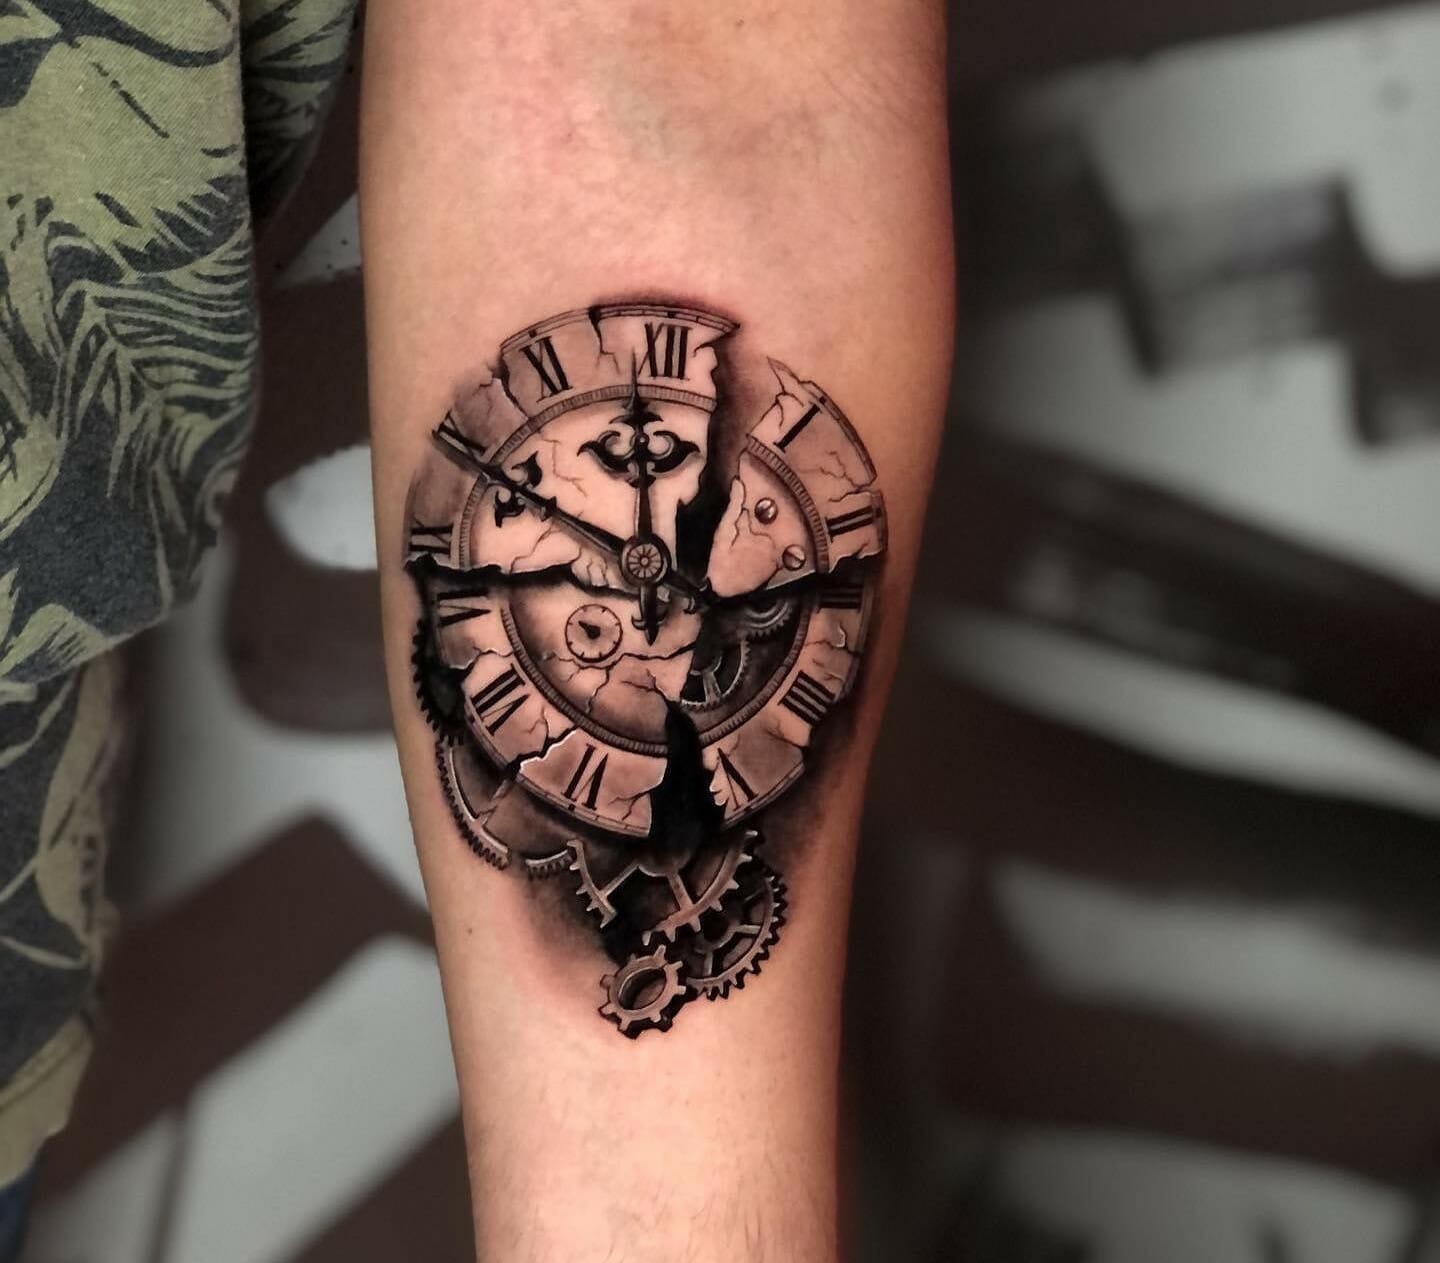 101 Best Clock Tattoo Ideas That Will Blow Your Mind! - Outsons